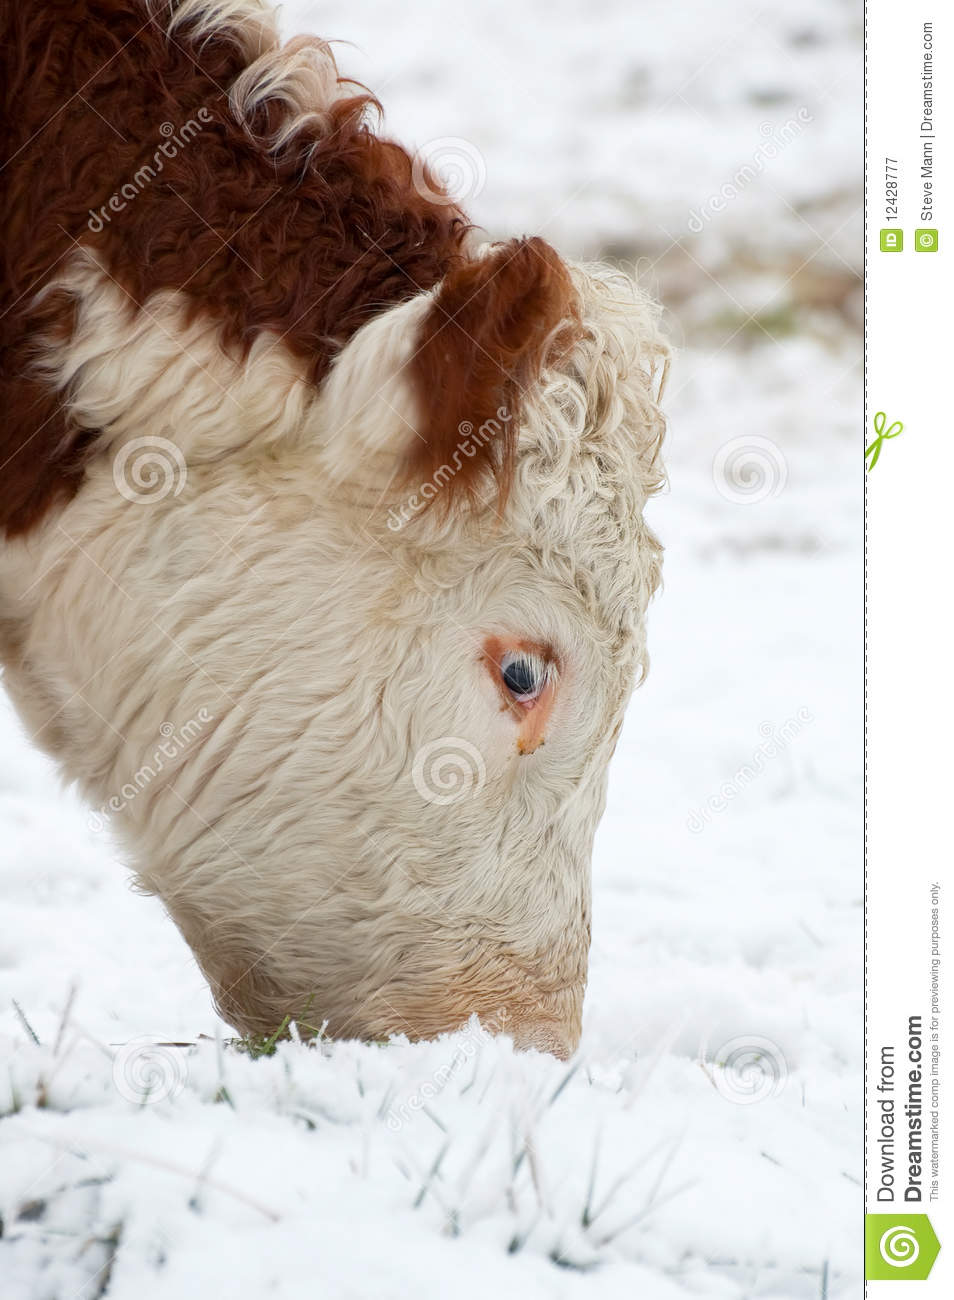 Female Cow Royalty Free Stock Photography   Image  12428777